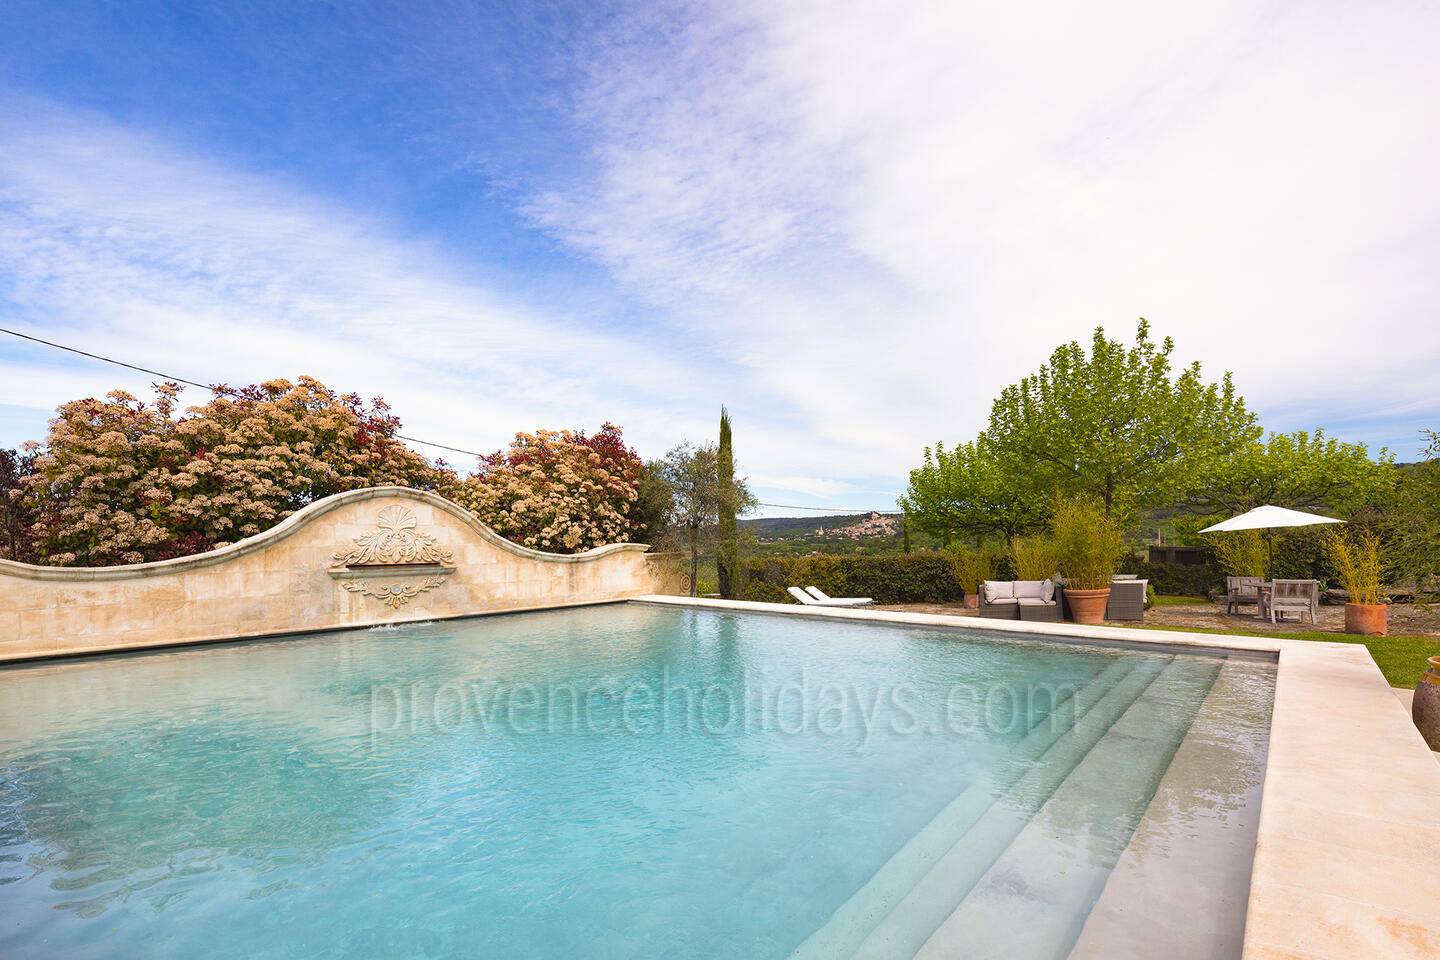 20 - Outstanding Property with Wonderful Views of the Luberon: Villa: Pool